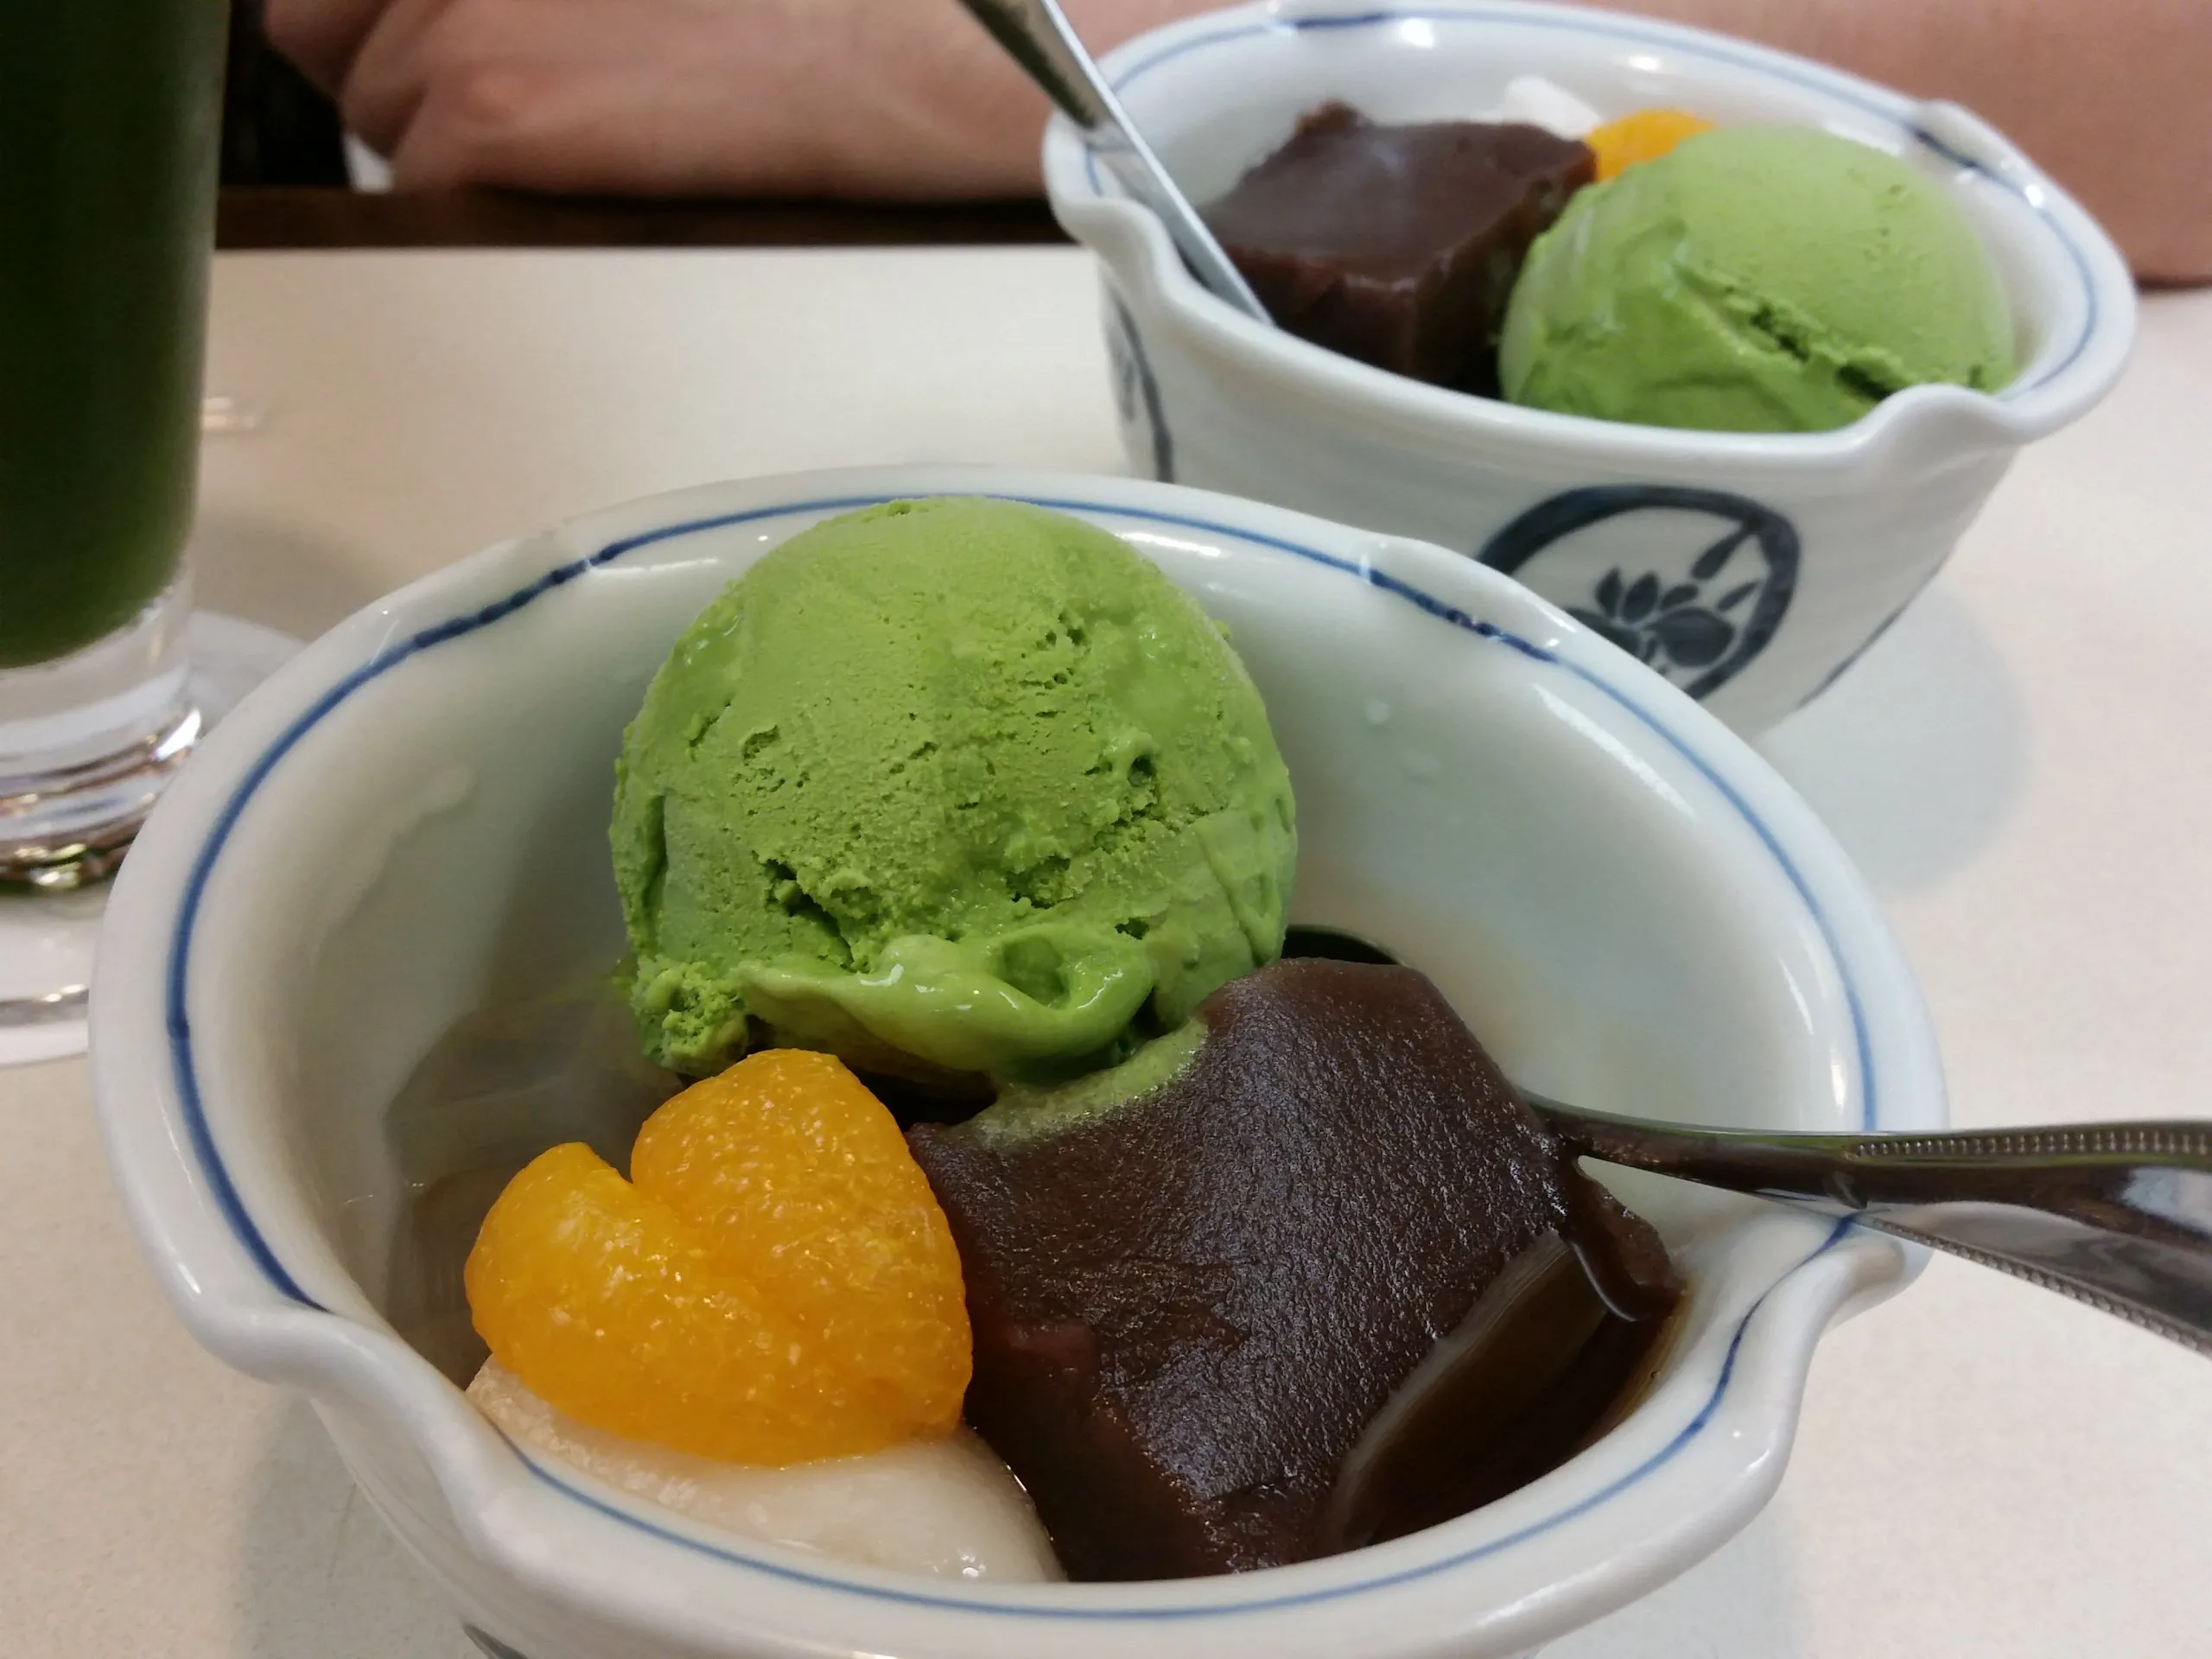 Mihashi Ueno Main Branch in Japan, east_asia | Sweets - Country Helper